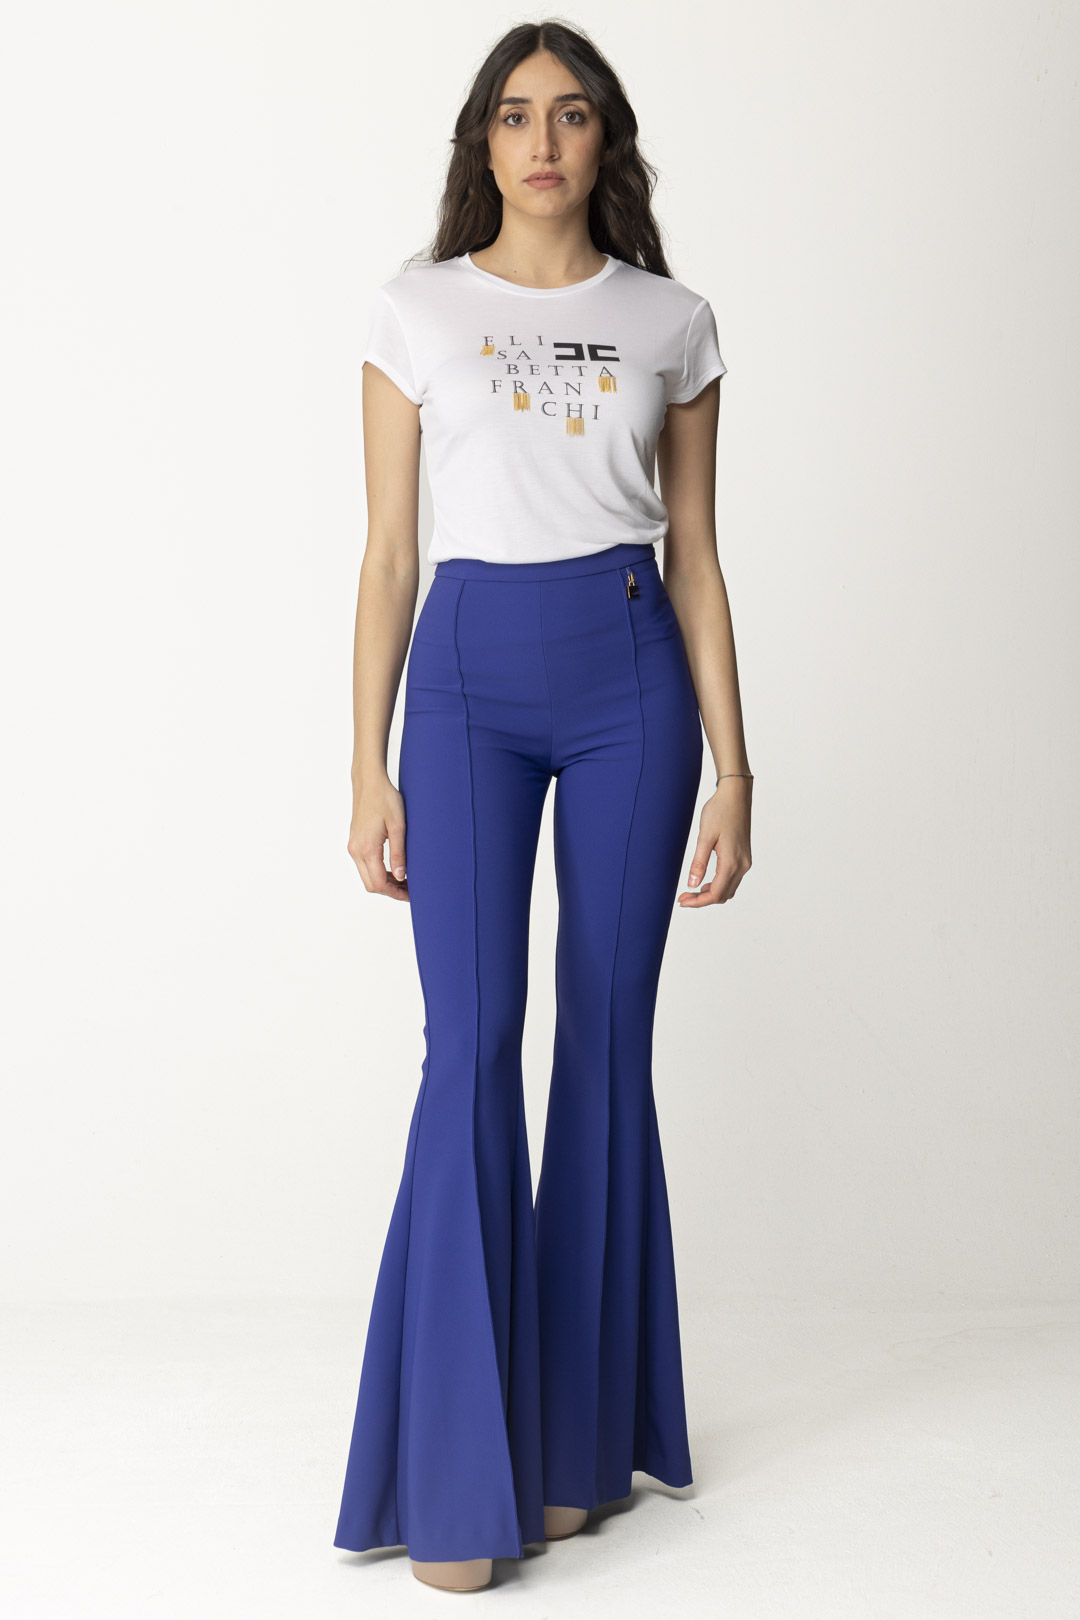 Preview: Elisabetta Franchi T-shirt with lettering logo and fringes Gesso